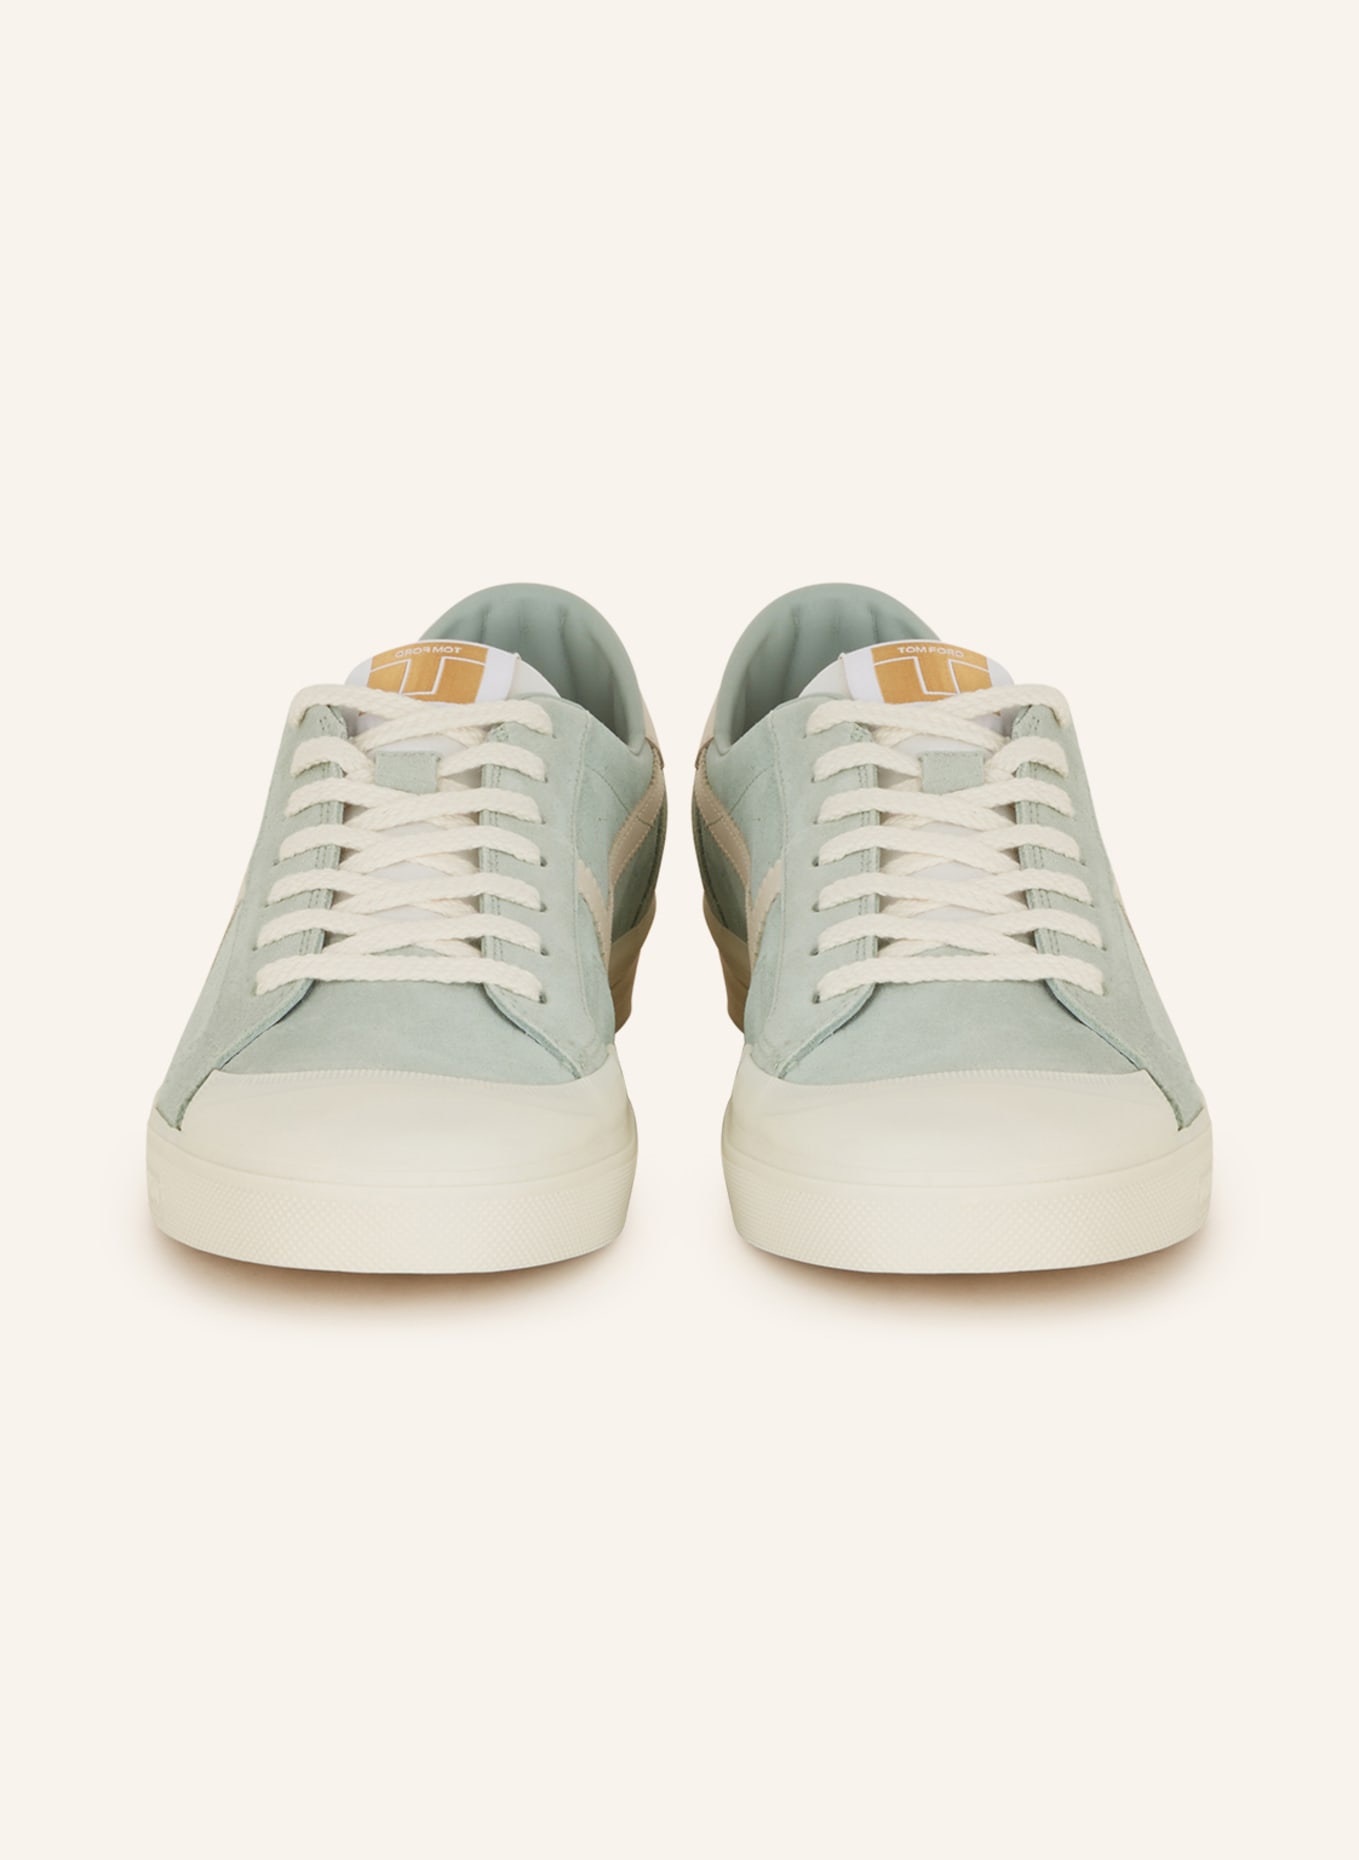 TOM FORD Sneakers JARVIS, Color: MINT/ ECRU (Image 3)